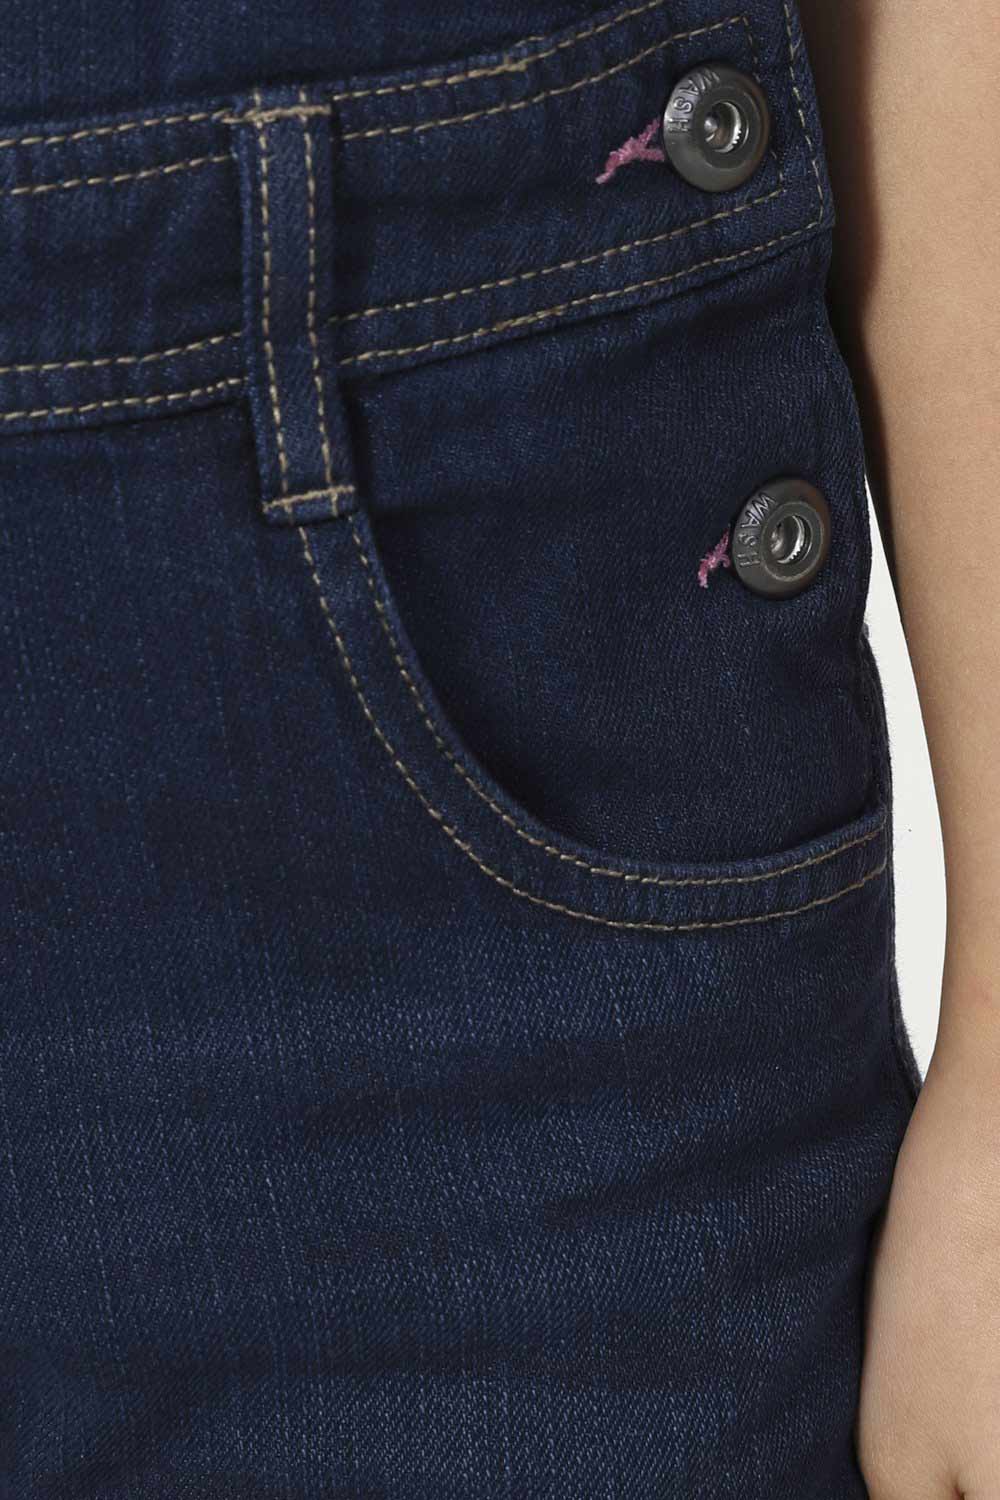 Close-up of front pockets and button fastening with pink stitch detail.